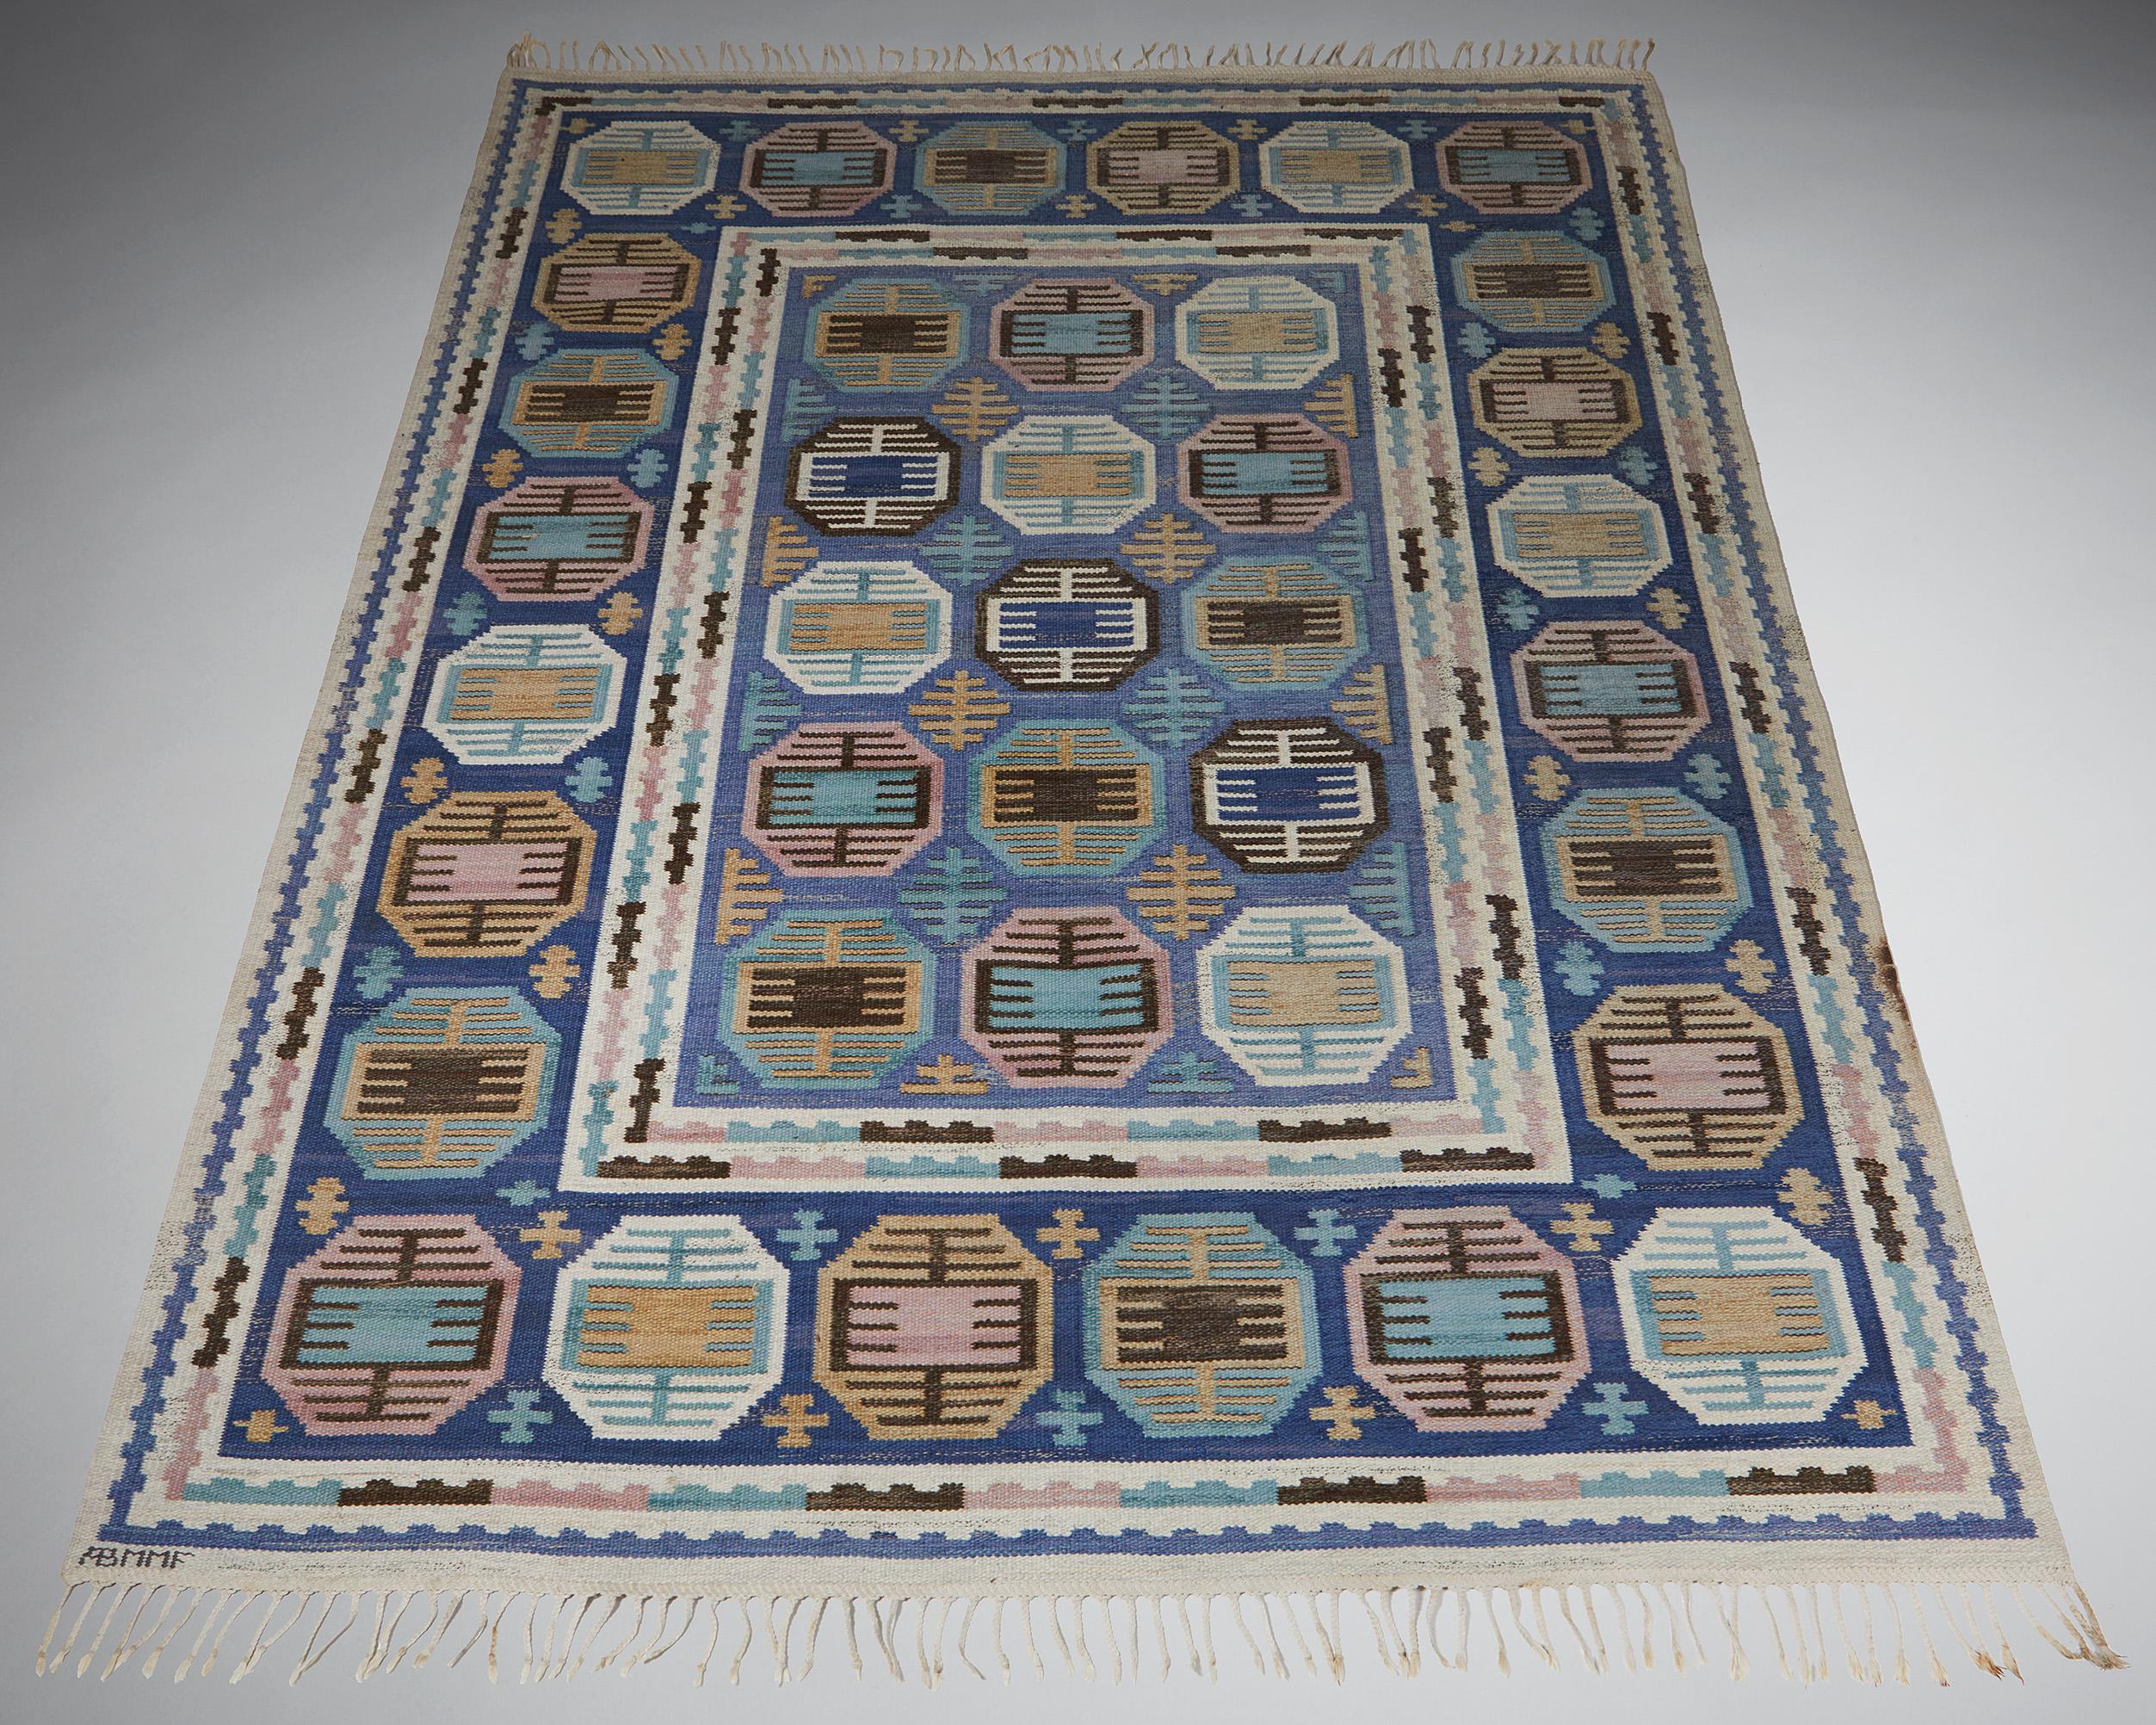 Woven after 1941. Wool. 

Signed ’AB MMF’

Measurements: 
L: 322 cm / 10’ 6 3/4